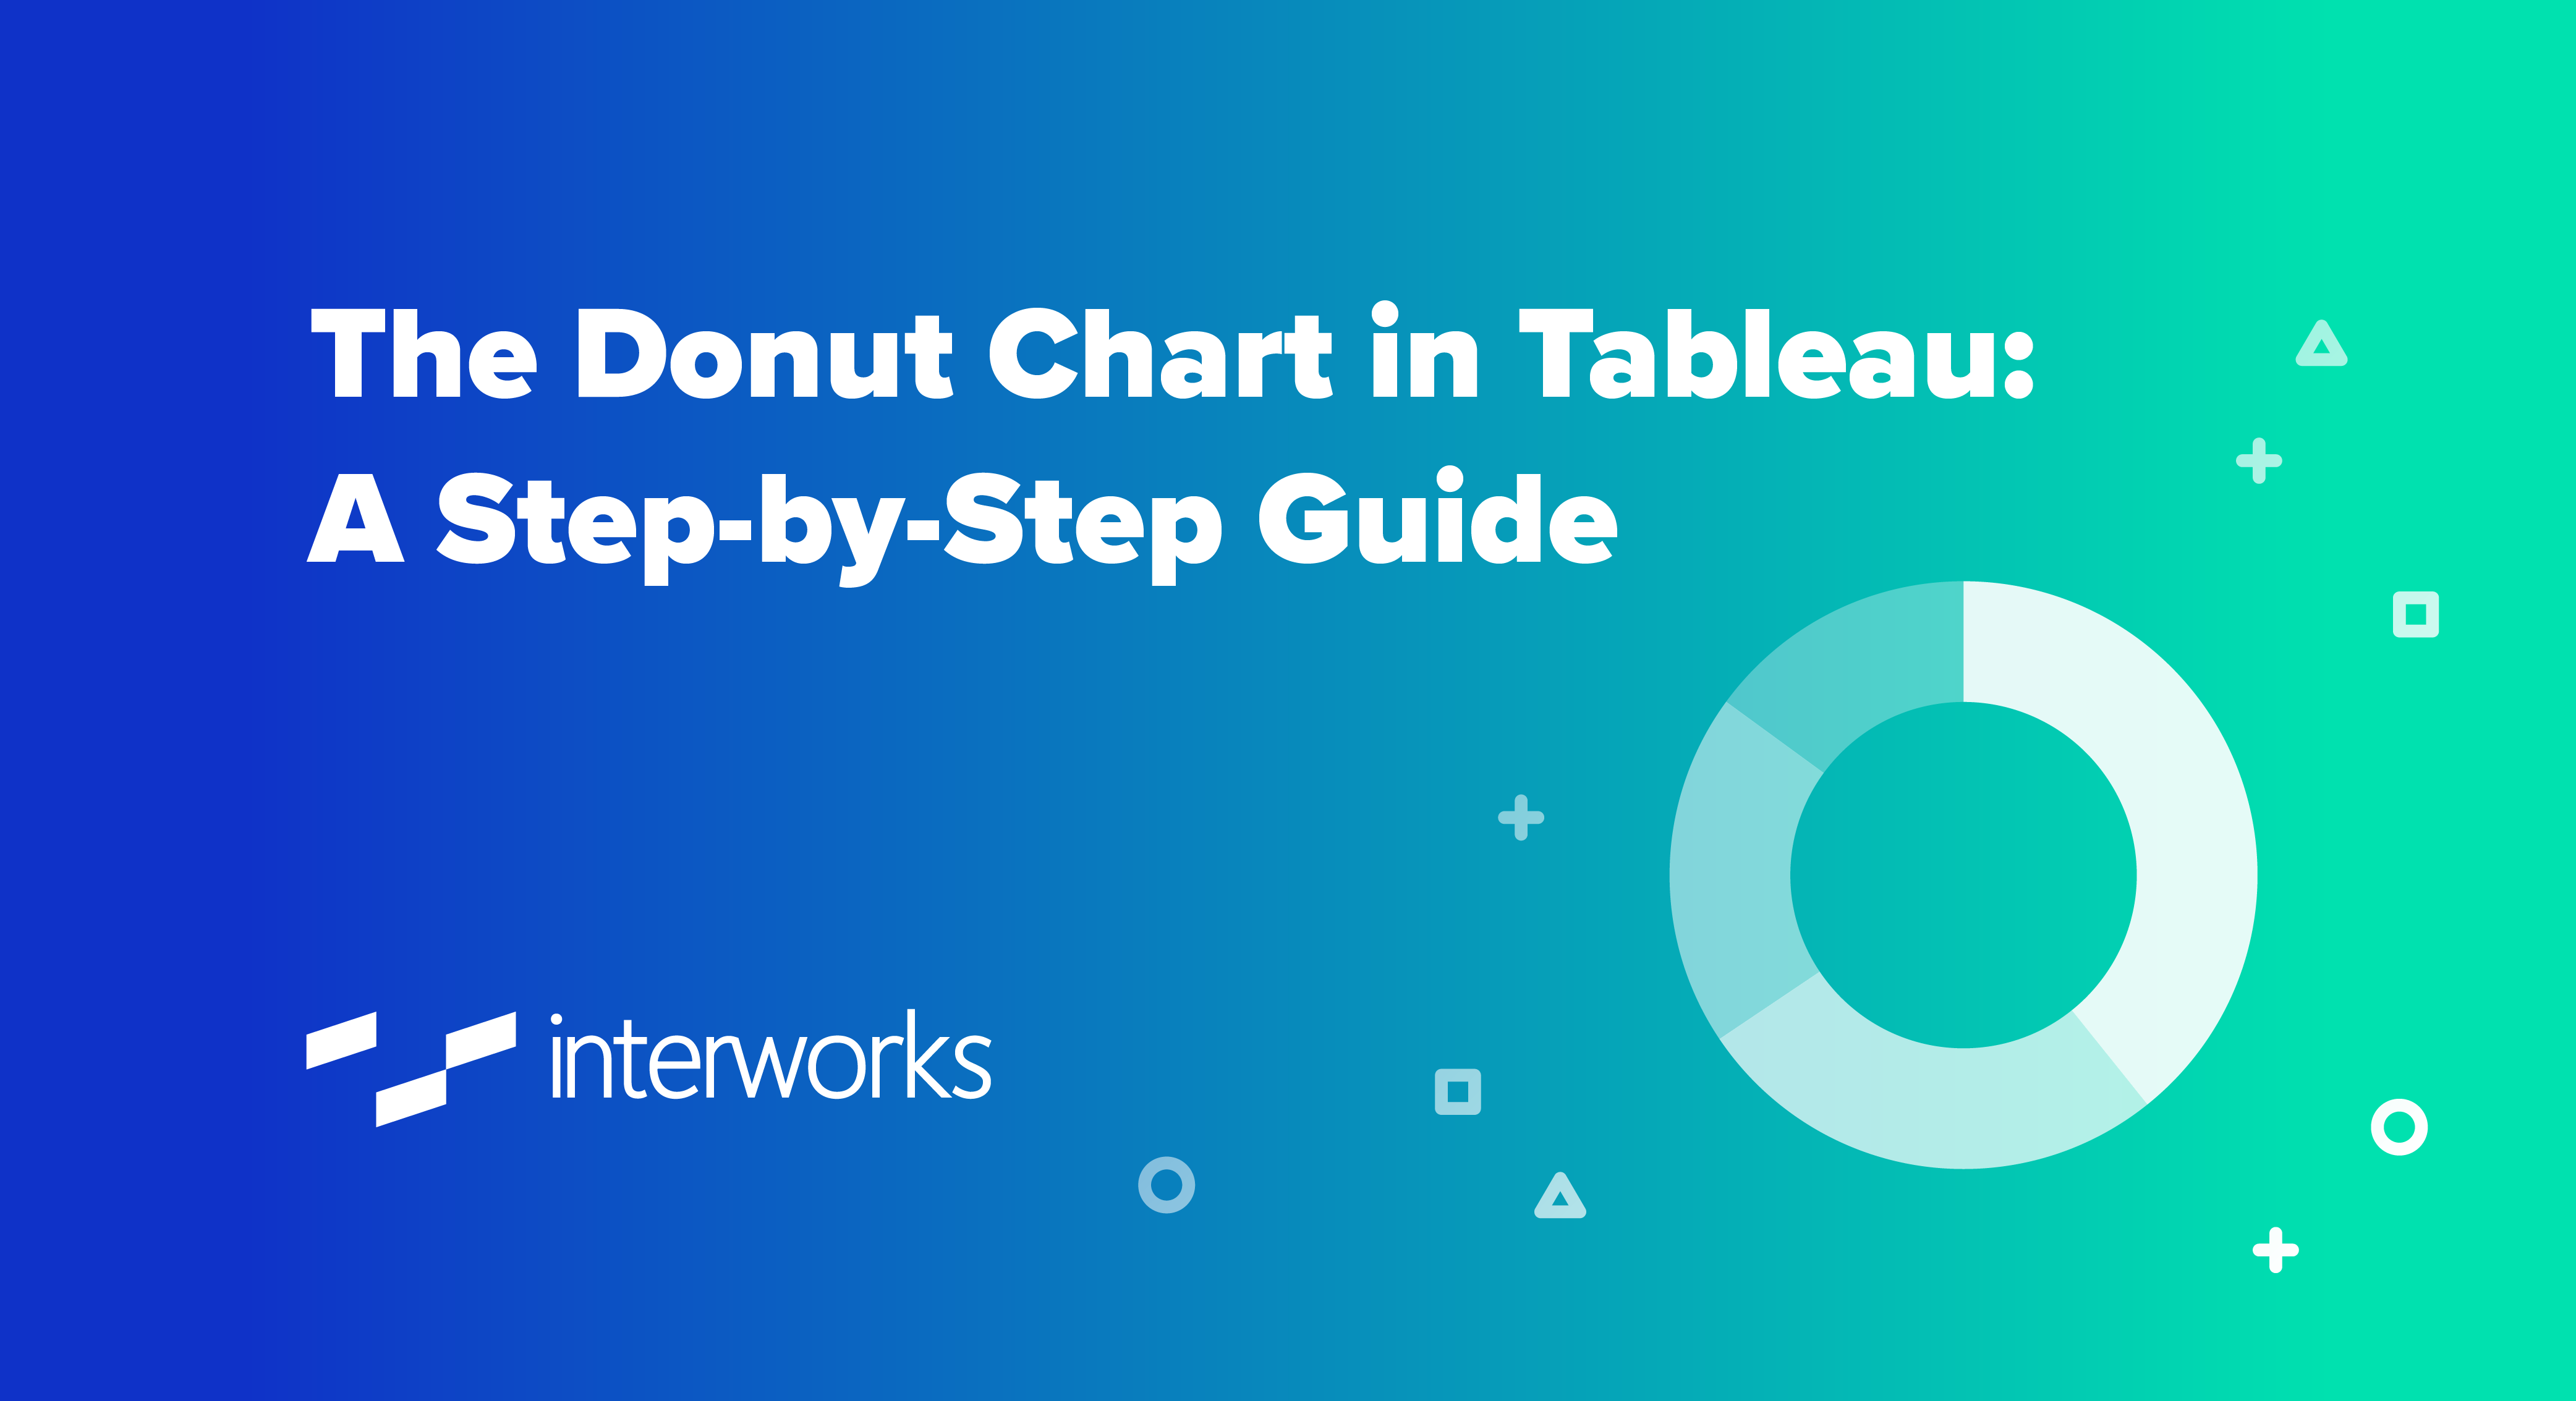 the donut chart in Tableau: a step-by-step guide